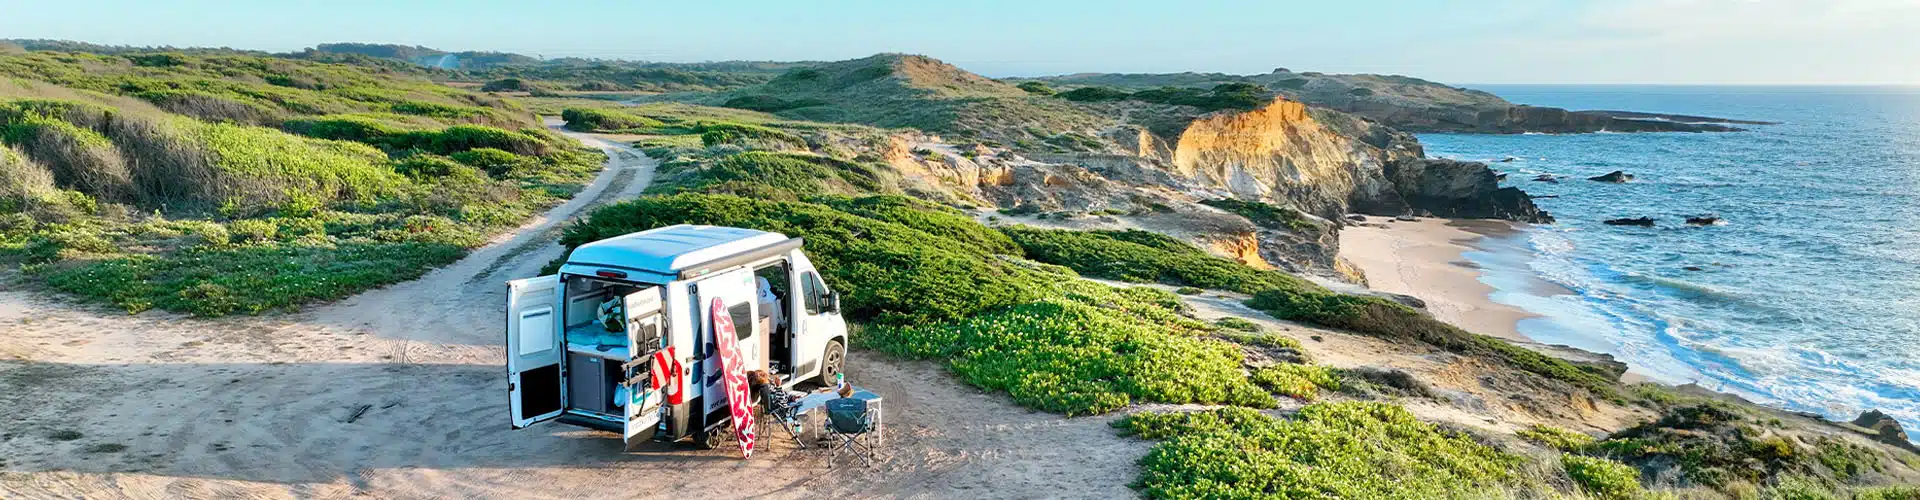 Girl Sitting In Front Of A Campervan Parked In Front Of The Sea